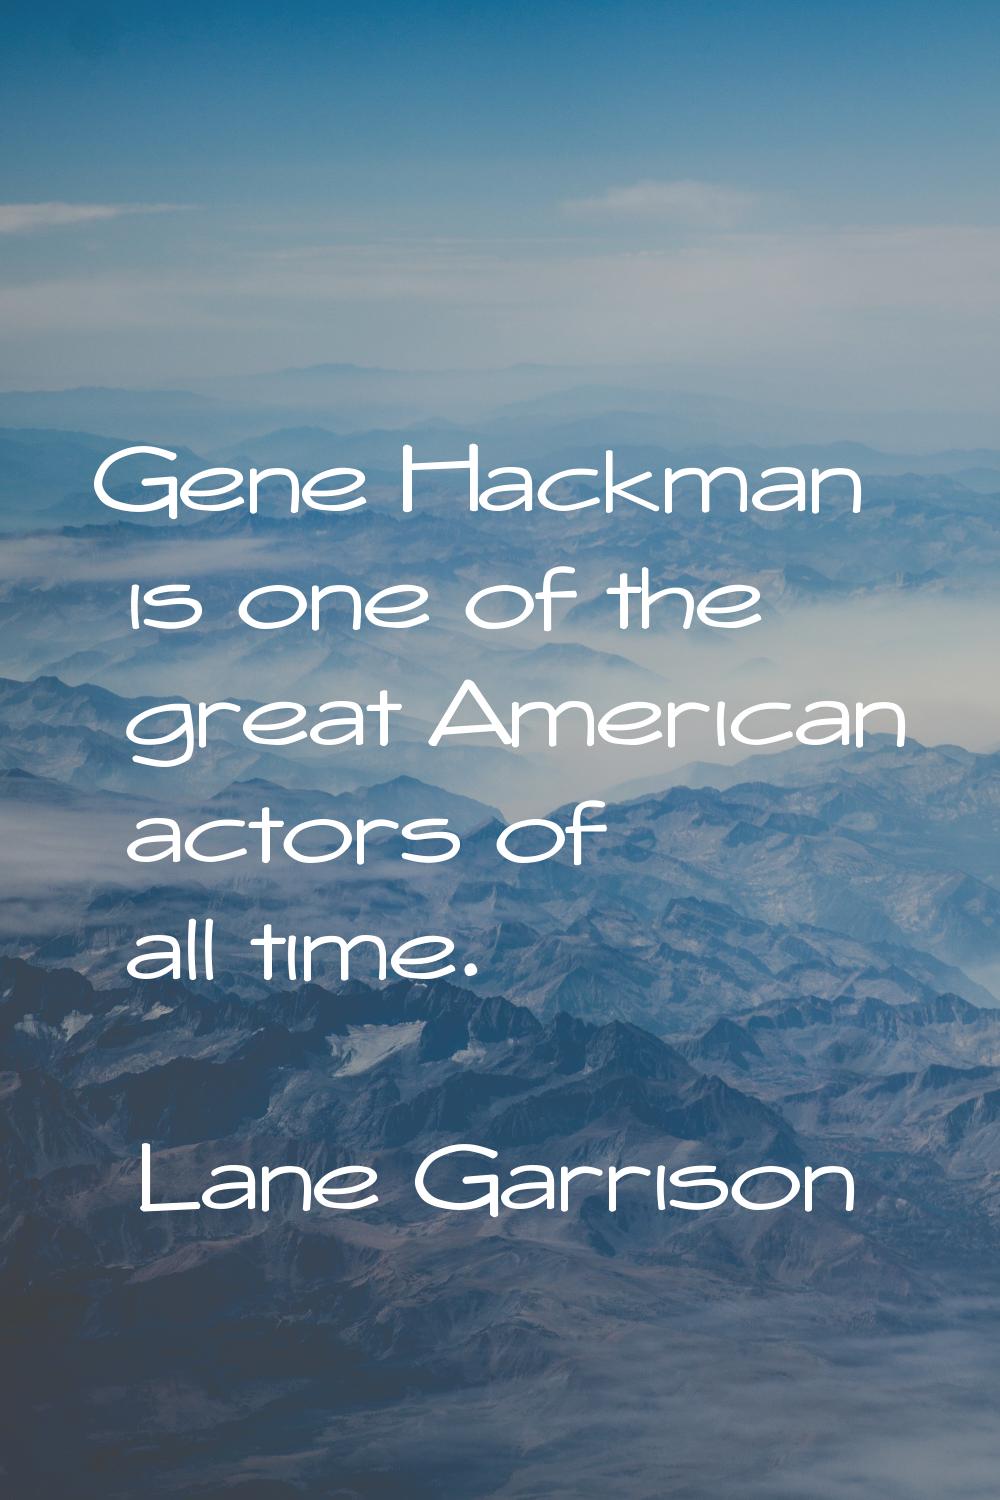 Gene Hackman is one of the great American actors of all time.